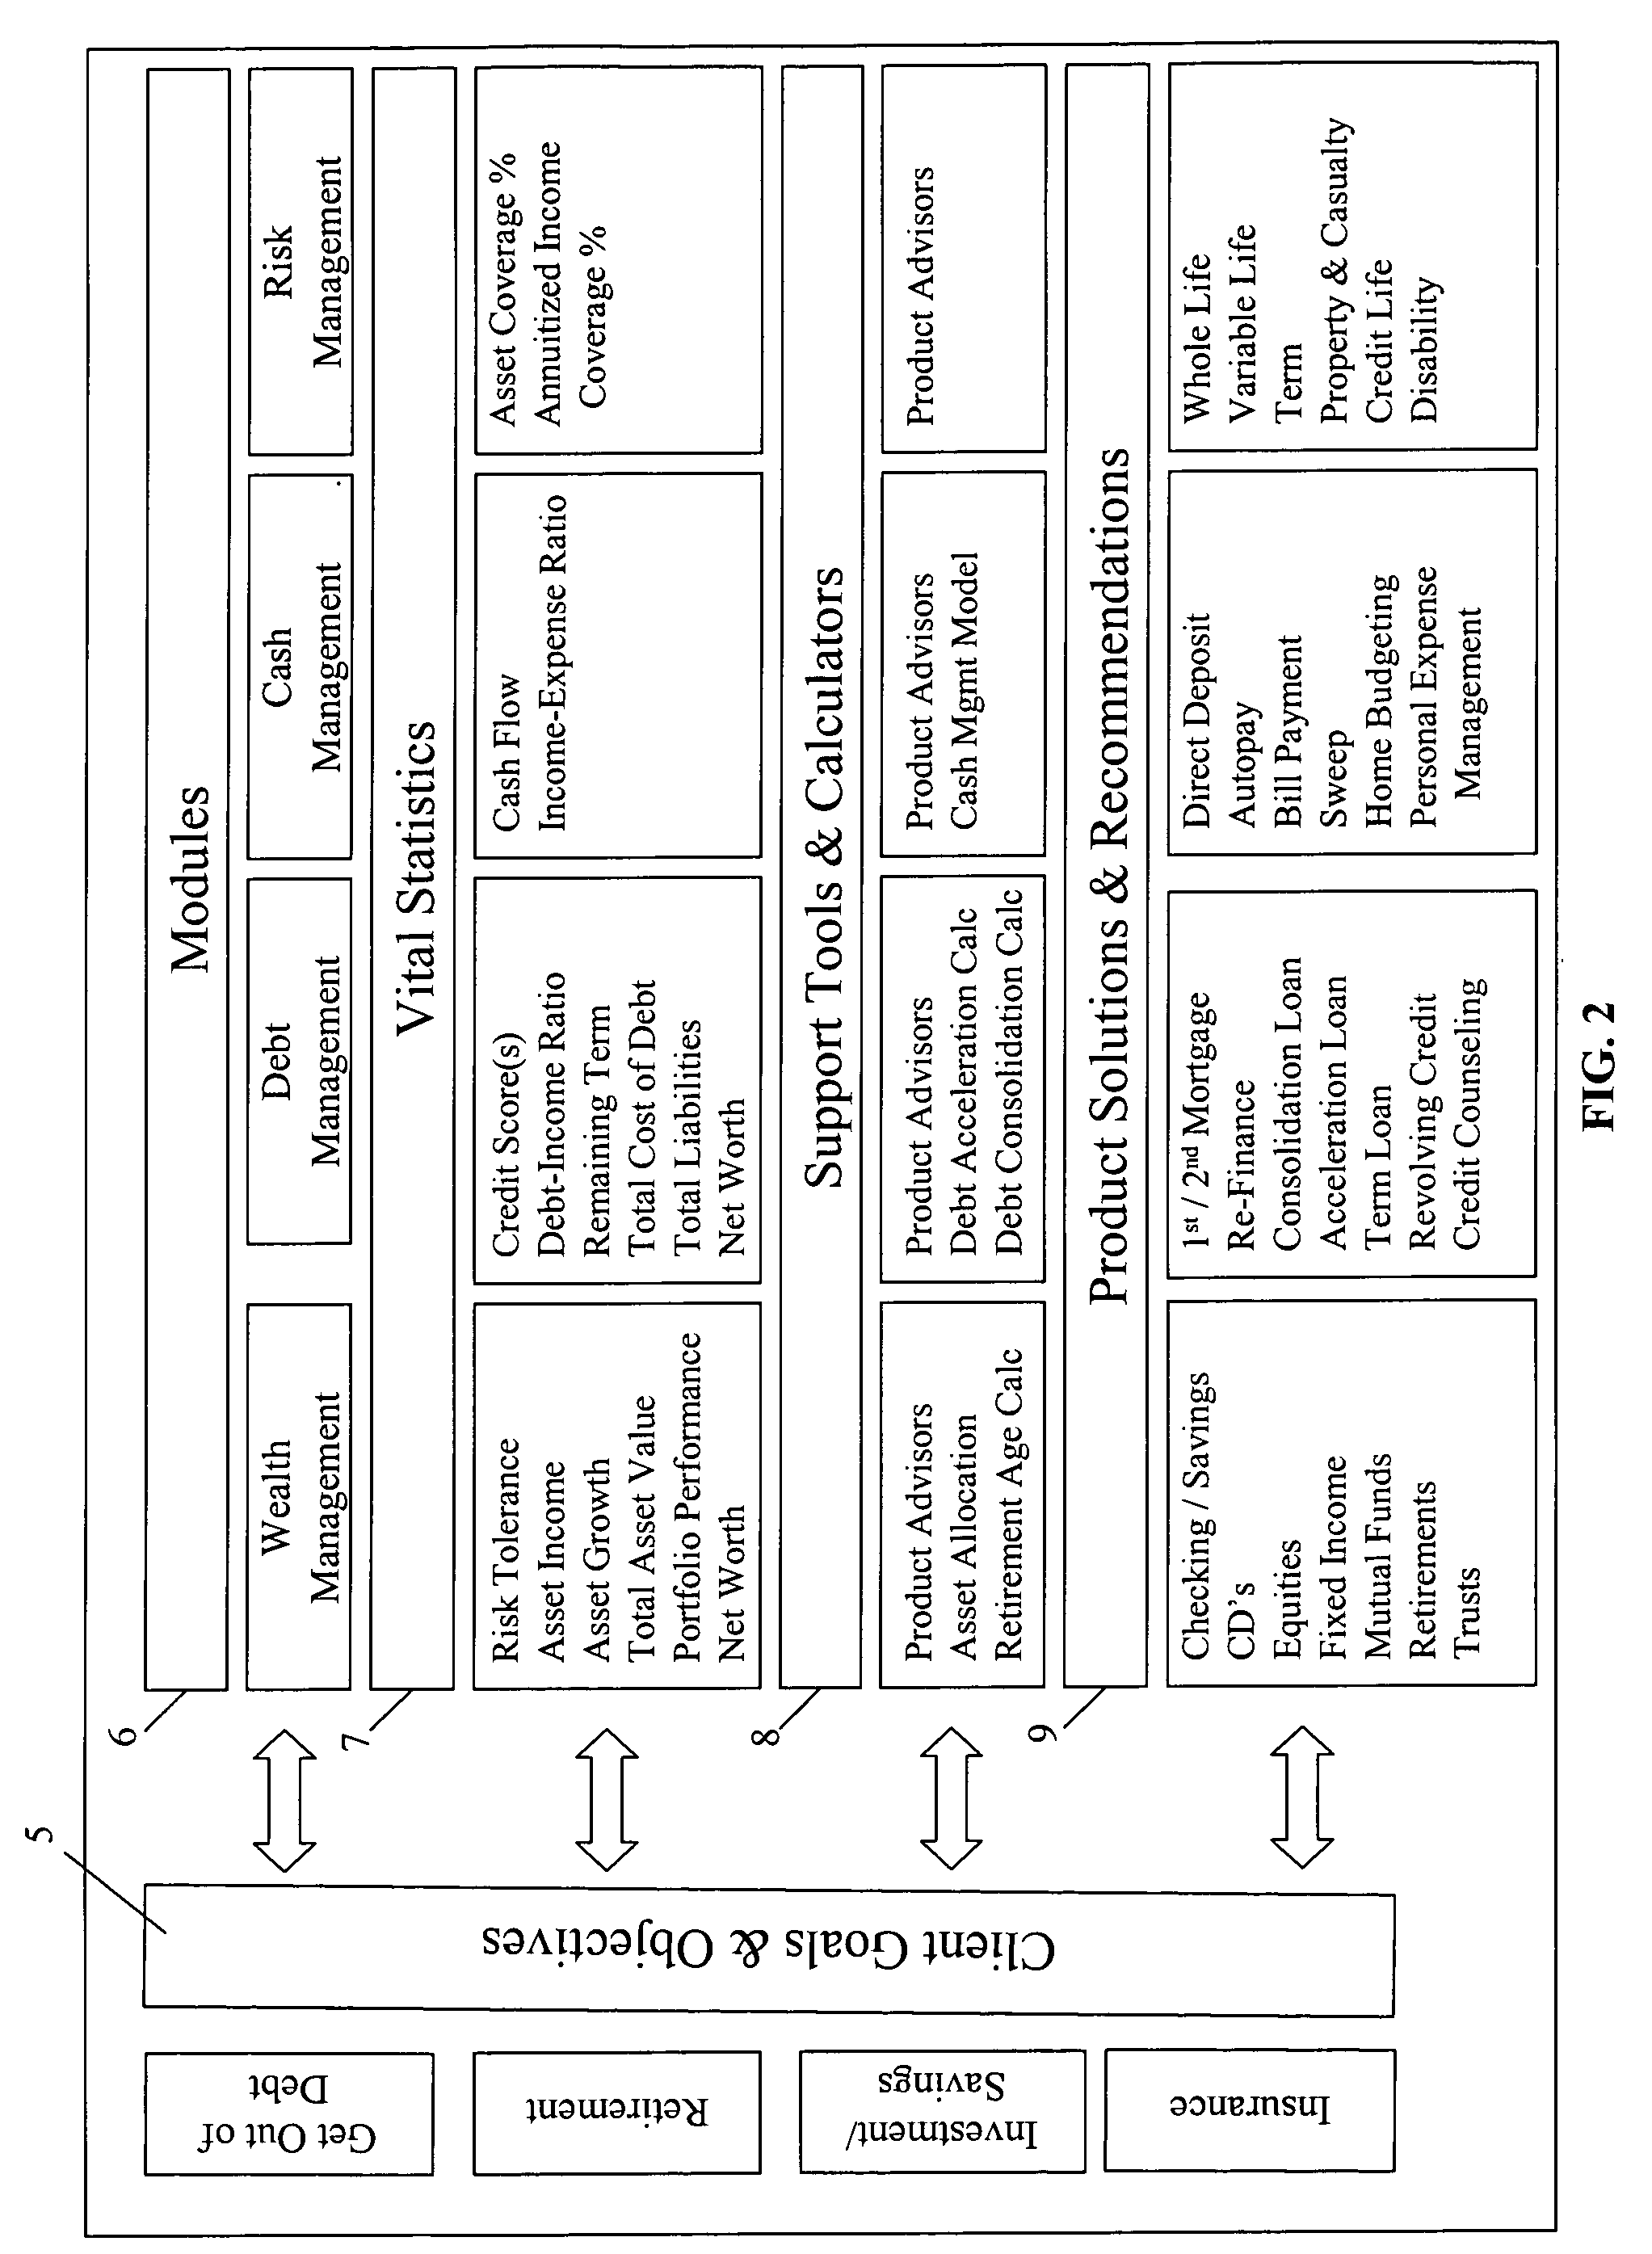 Method and system for conducting customer needs, staff development, and persona-based customer routing analysis